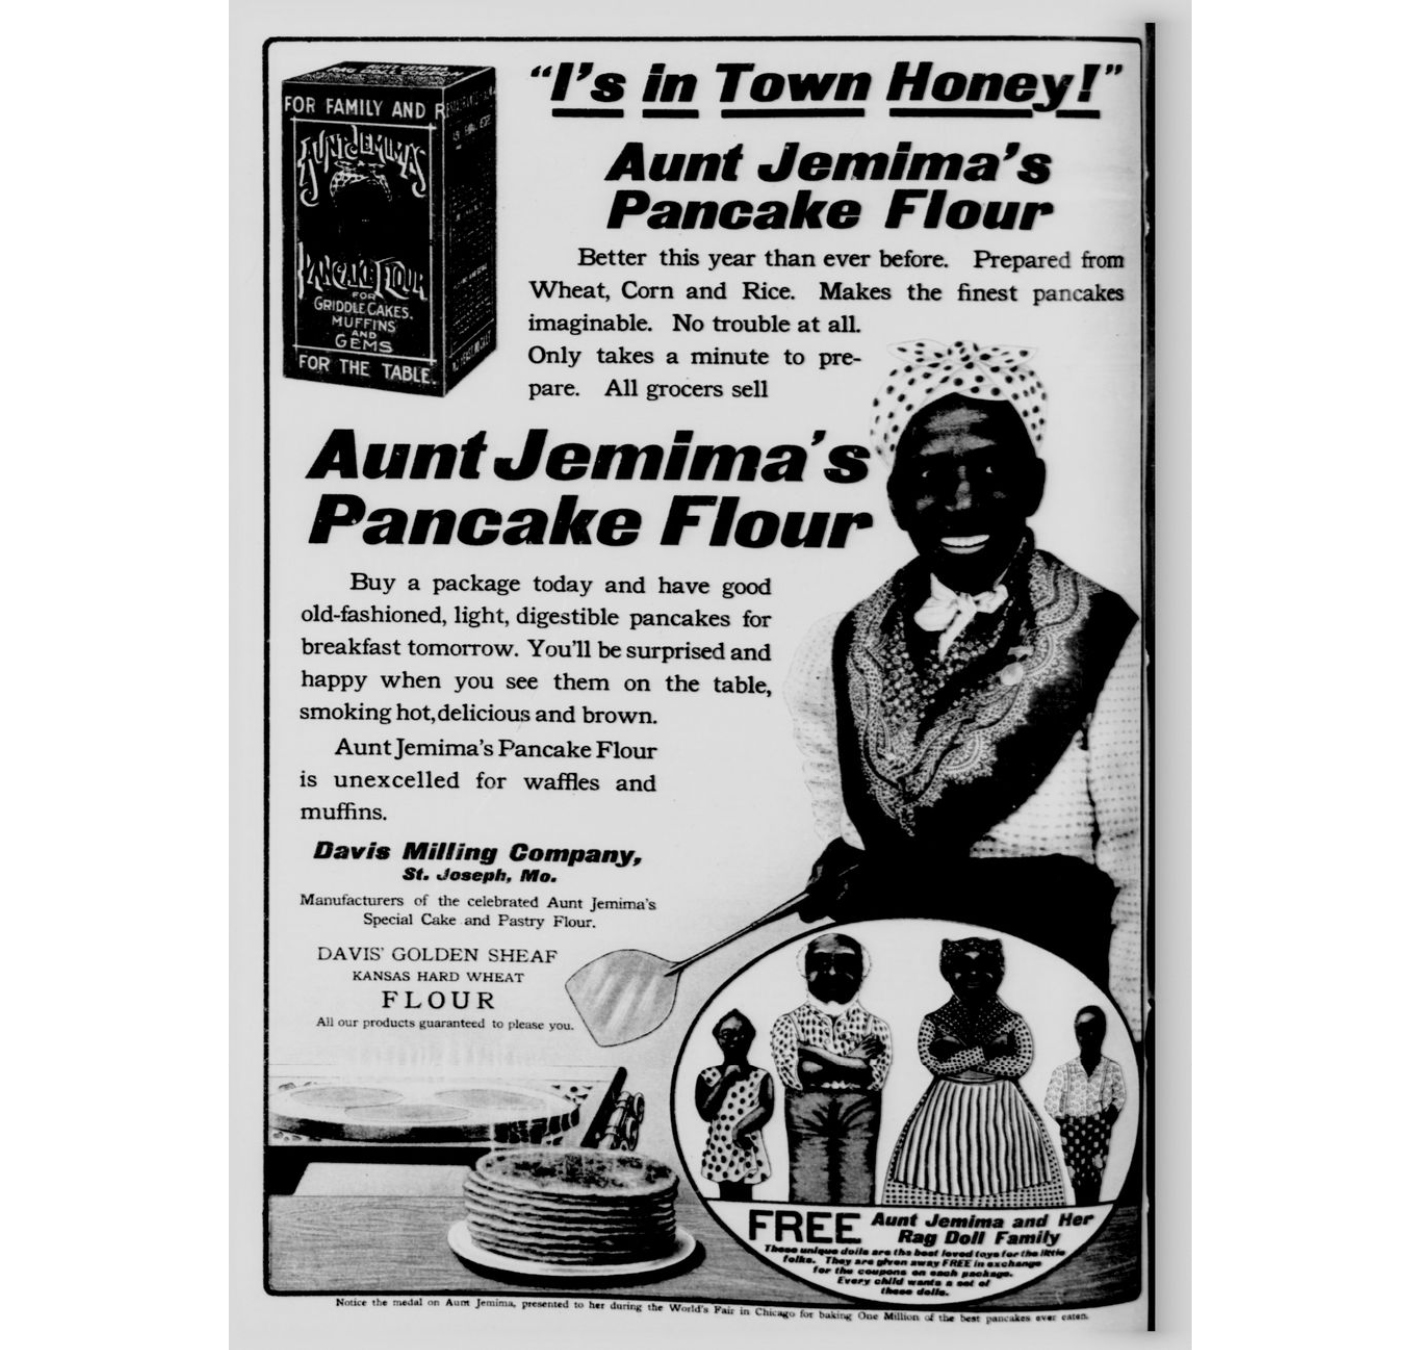 PHOTO: An Aunt Jemima ad featuring Nancy Green, the original Aunt Jemima, that was in the New York Tribune, Nov. 7, 1909.